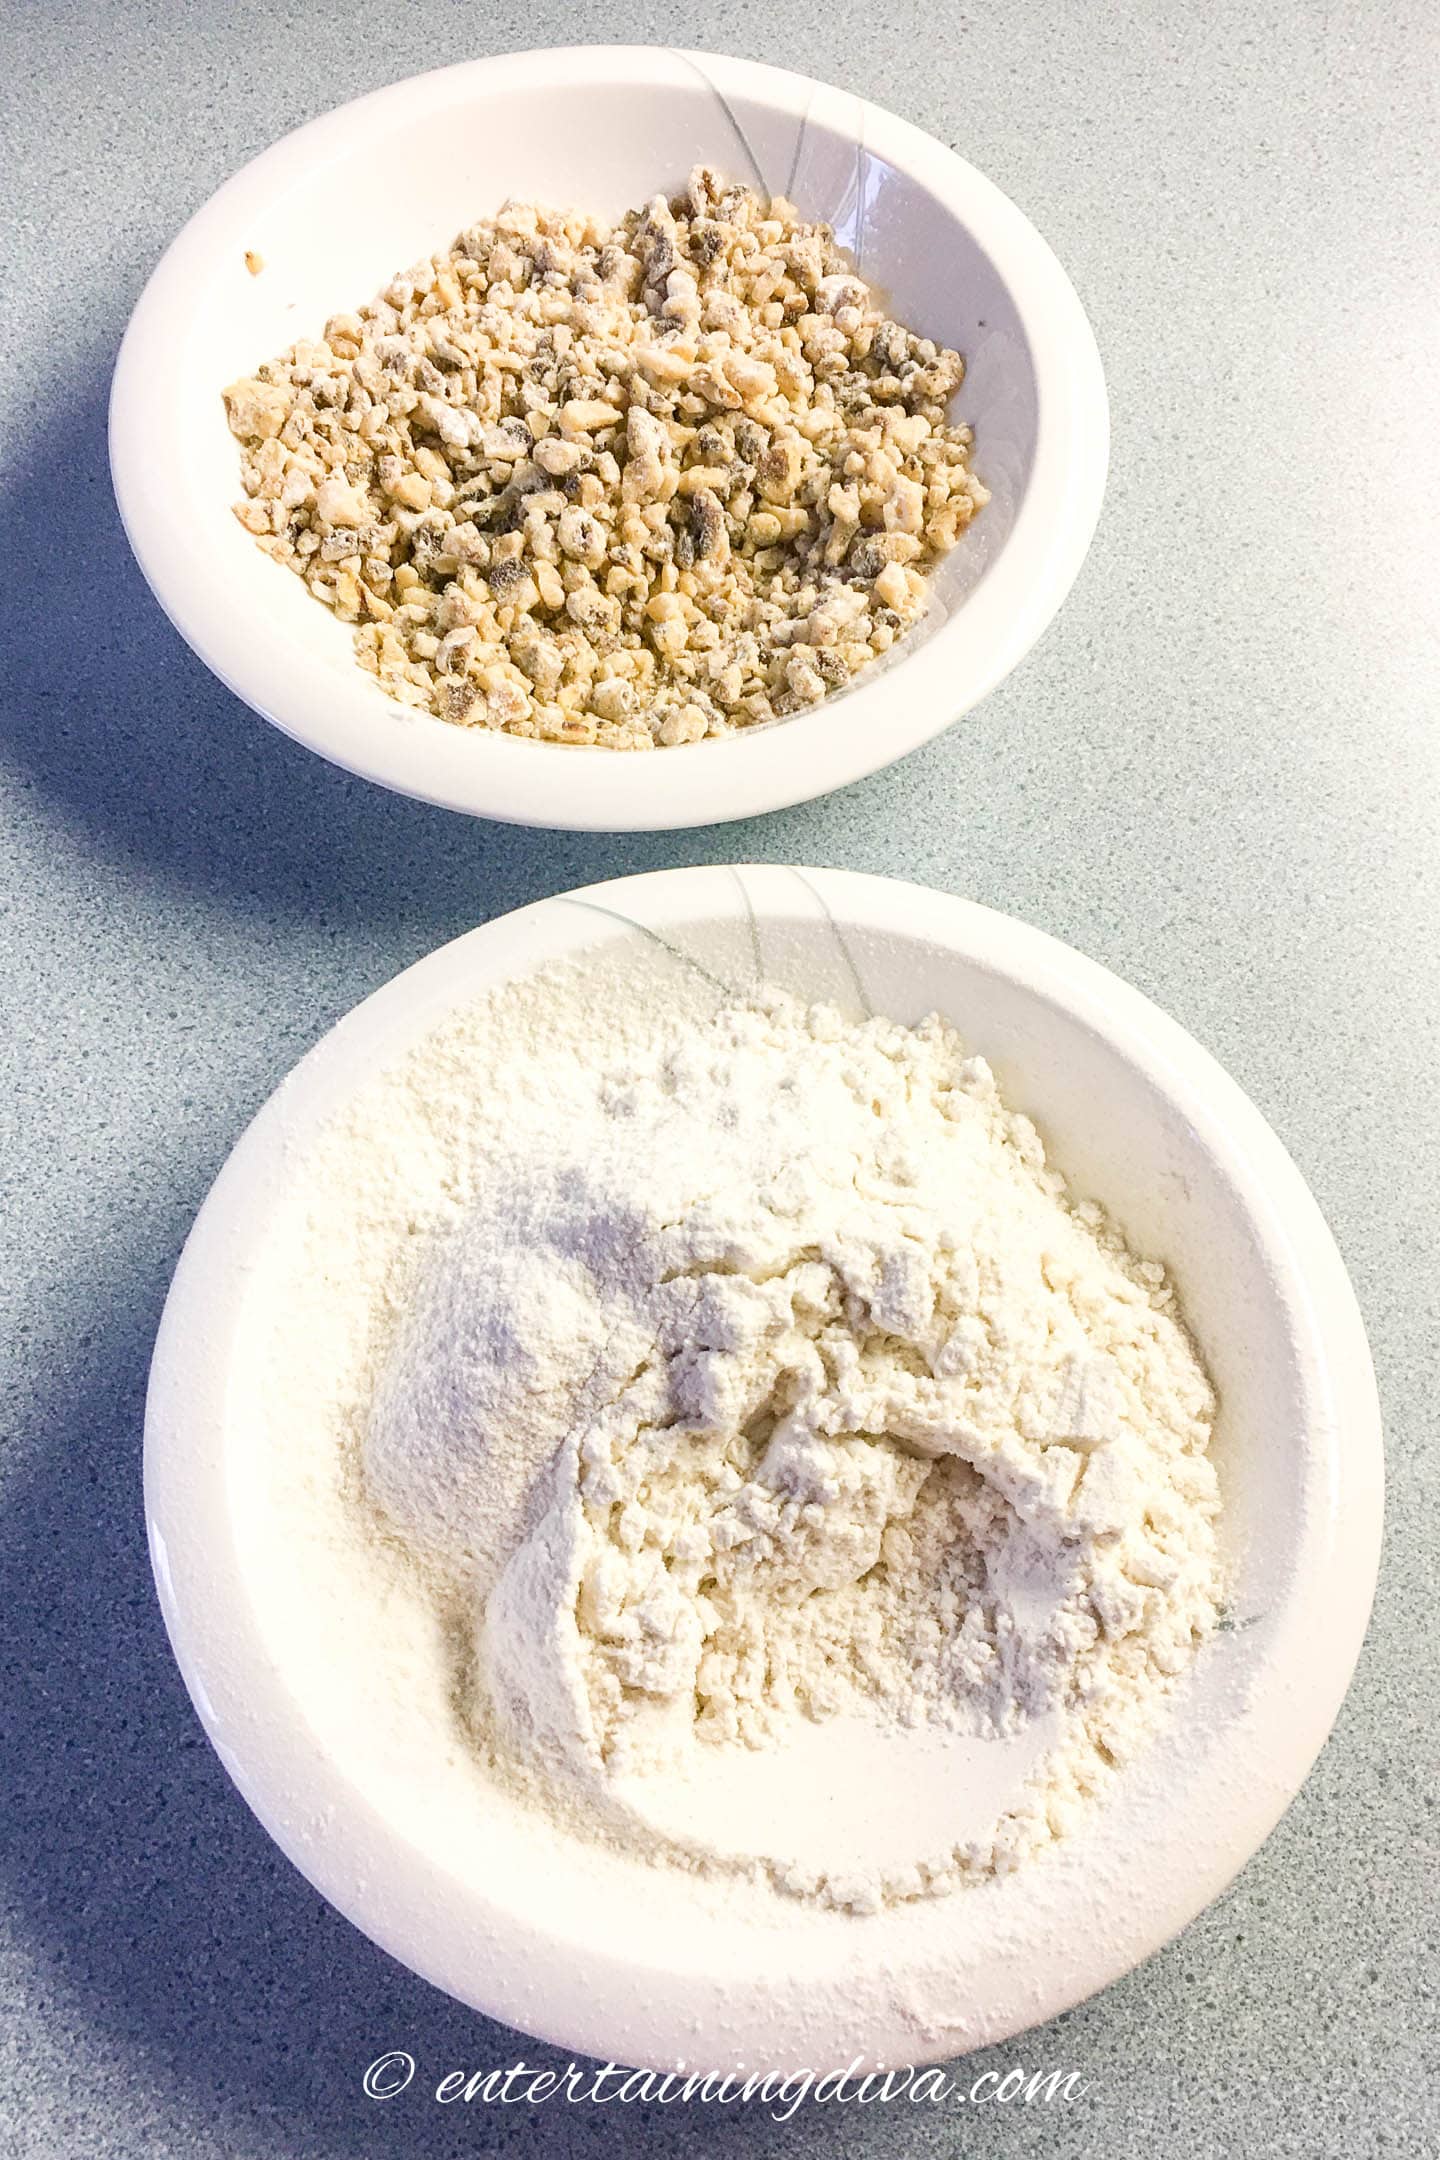 Walnuts and flour mixture in bowls